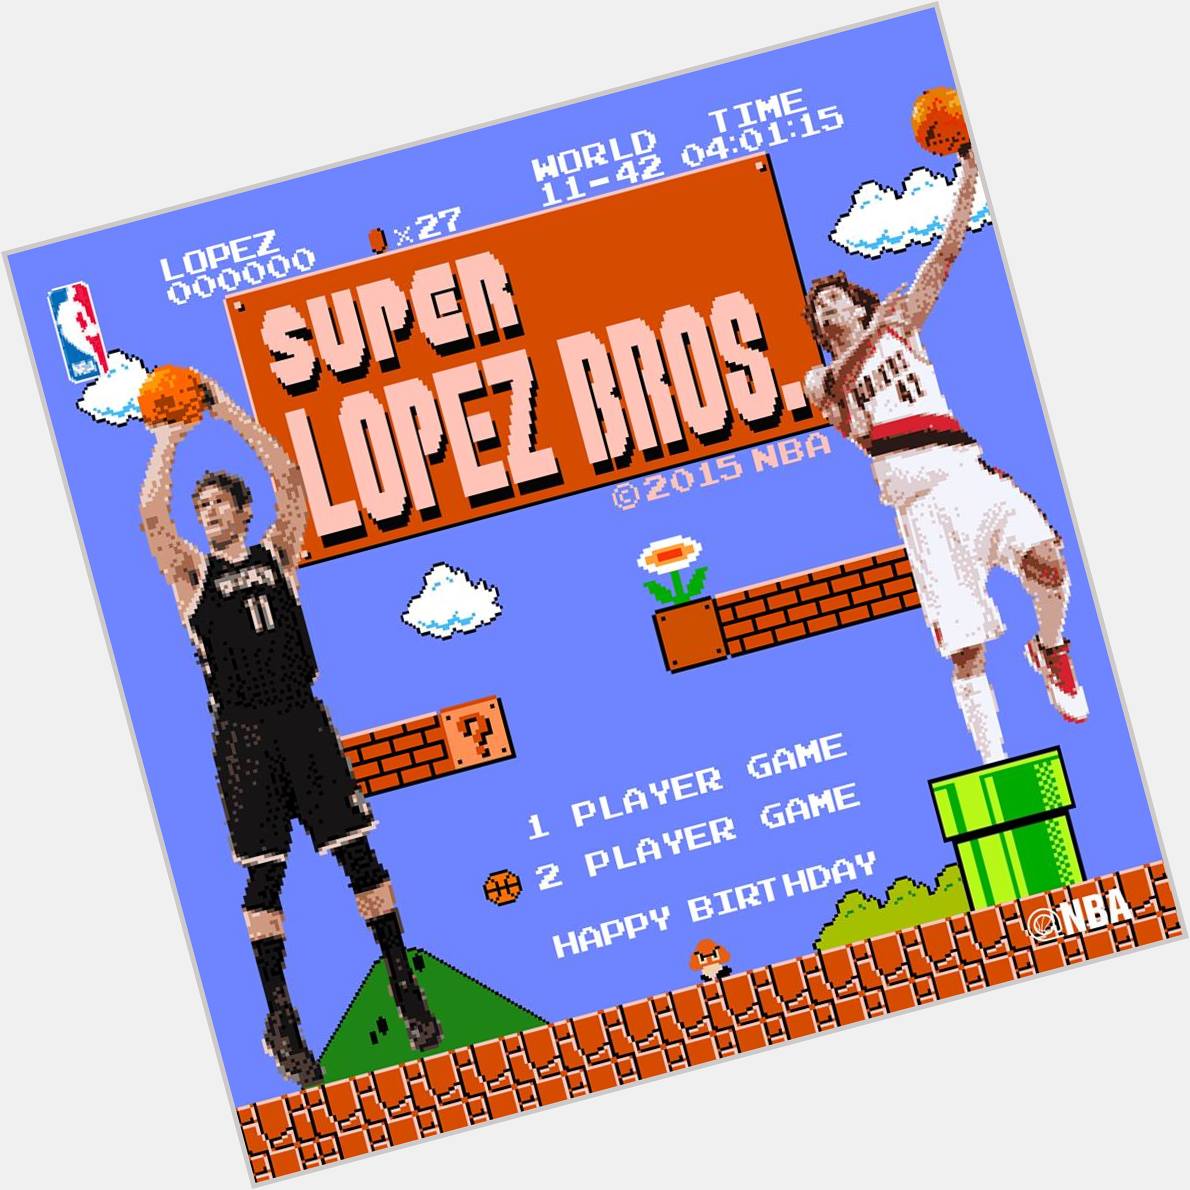 This might be the best illusration to wish the Big fella Brook Lopez a happy birthday   